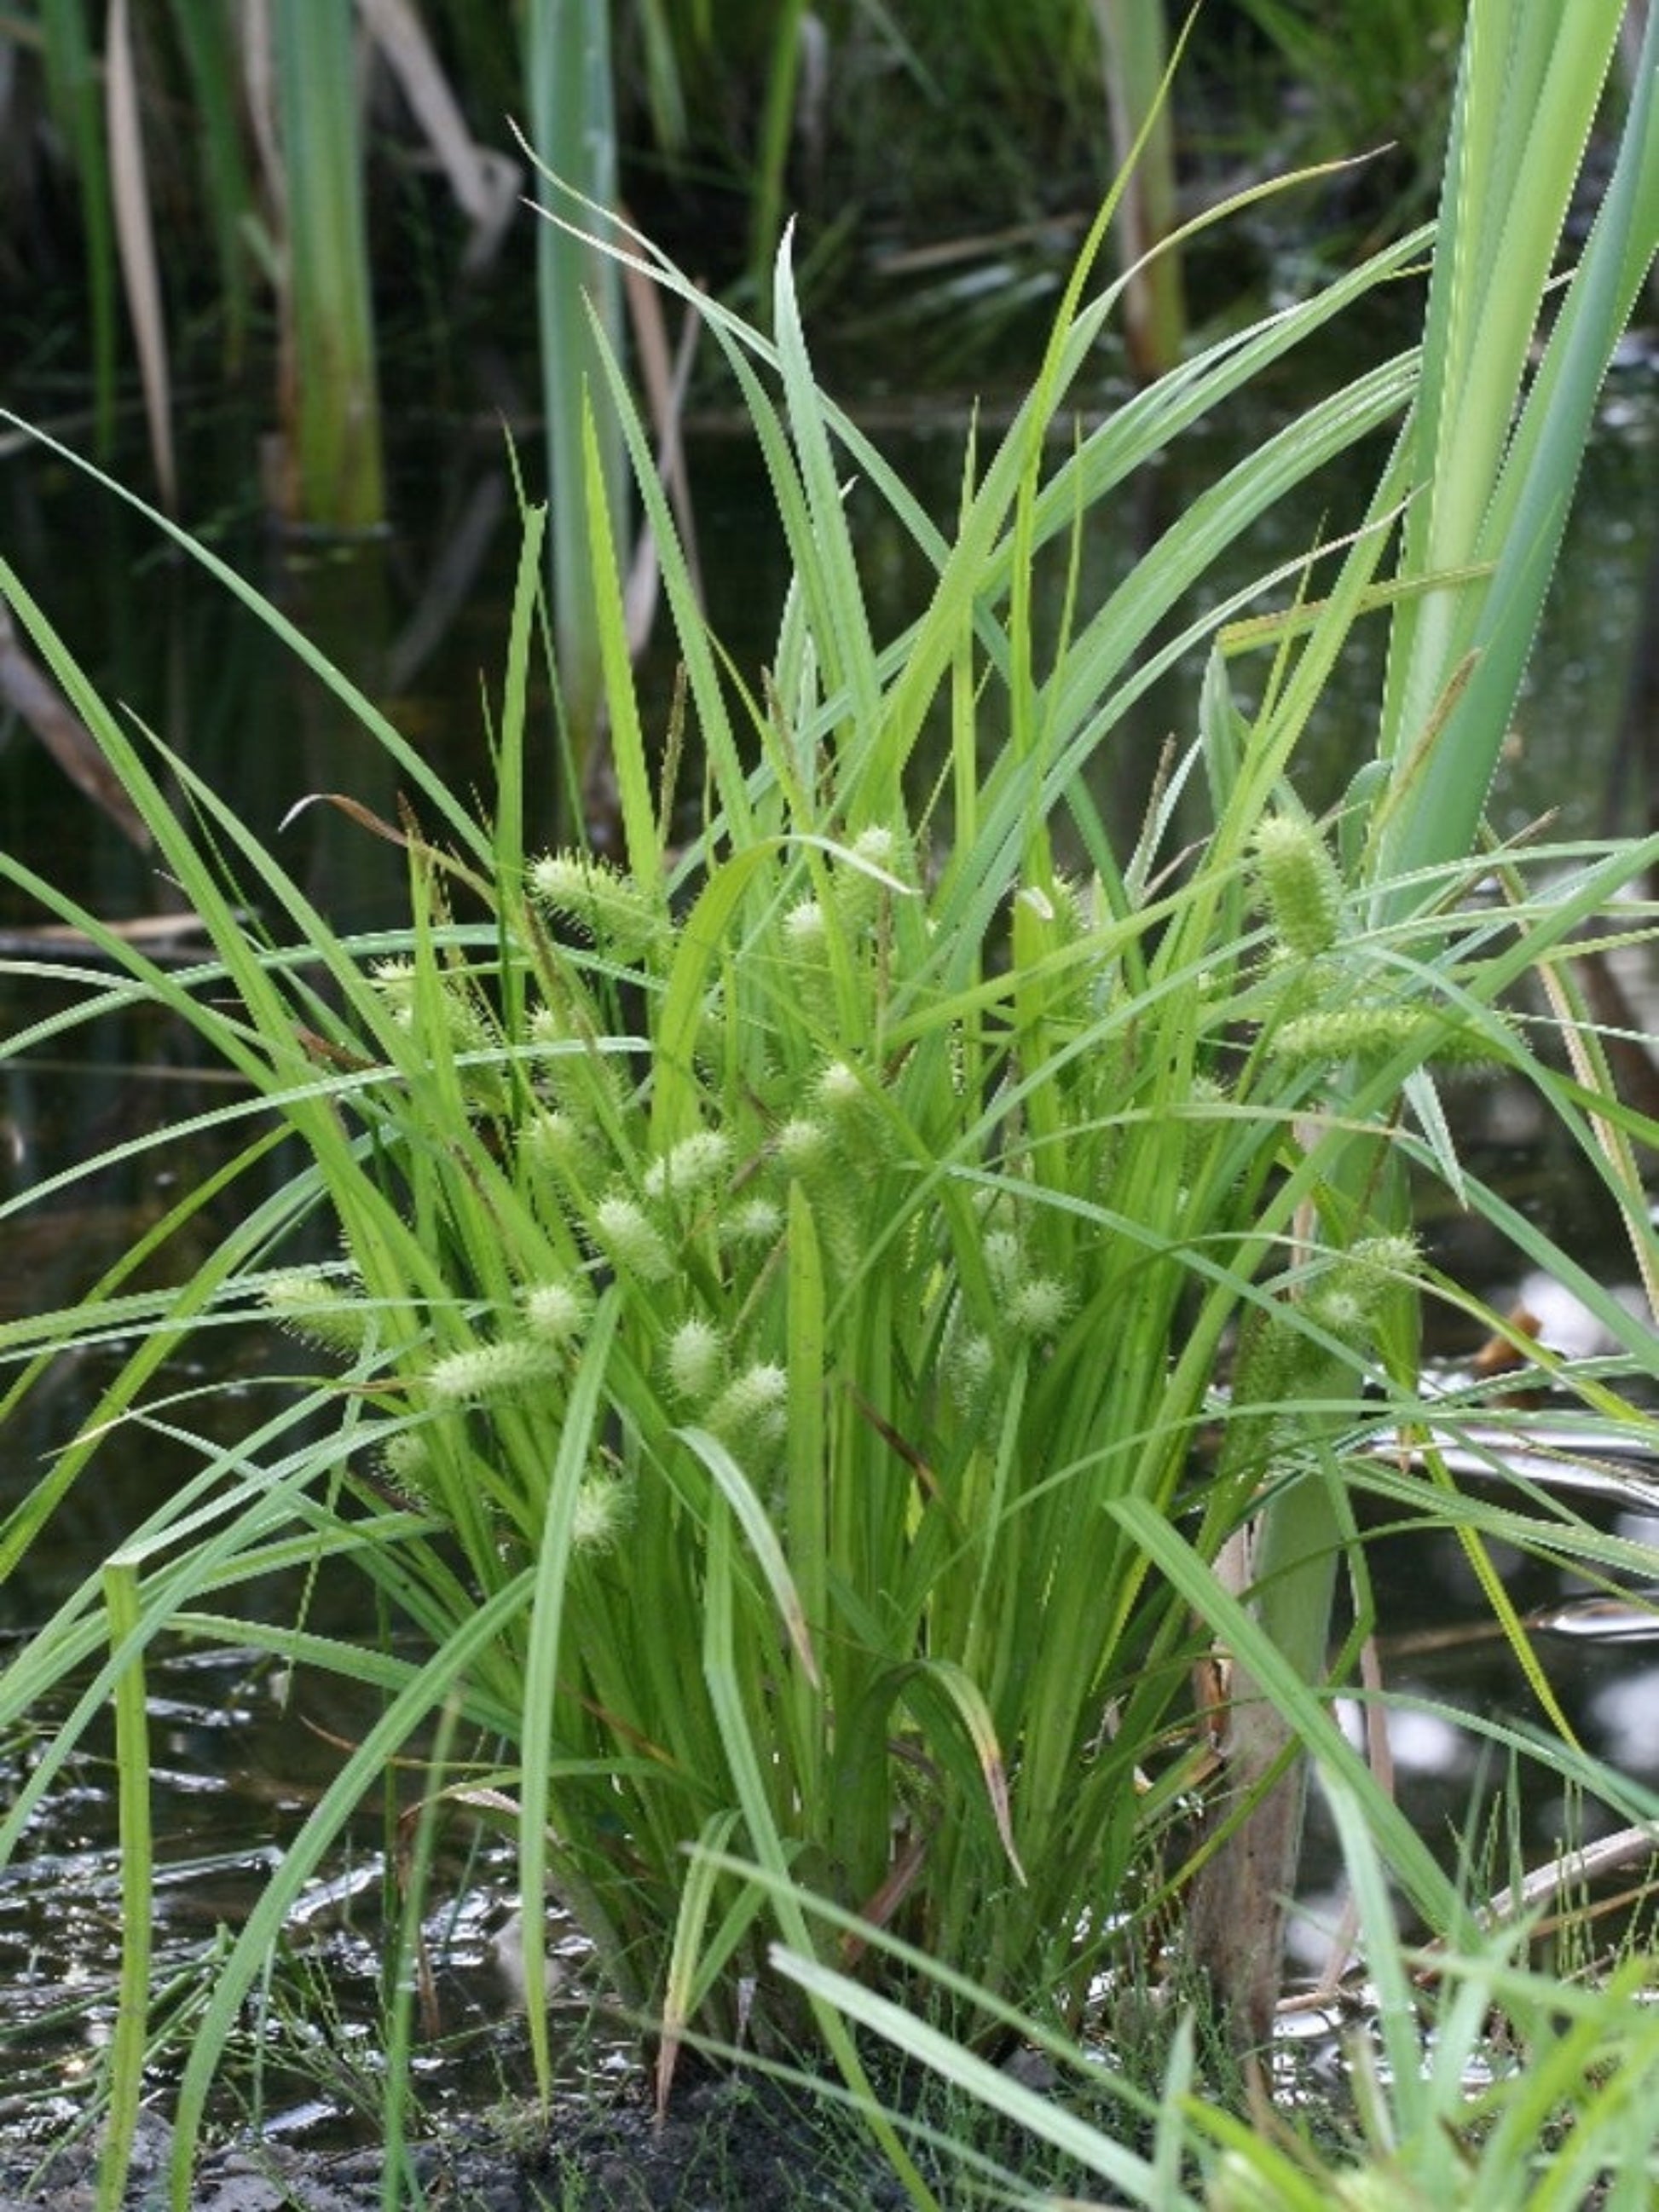 carex lurida " shallow sedge" is host plant for dun and Appalachian skipper butterfly